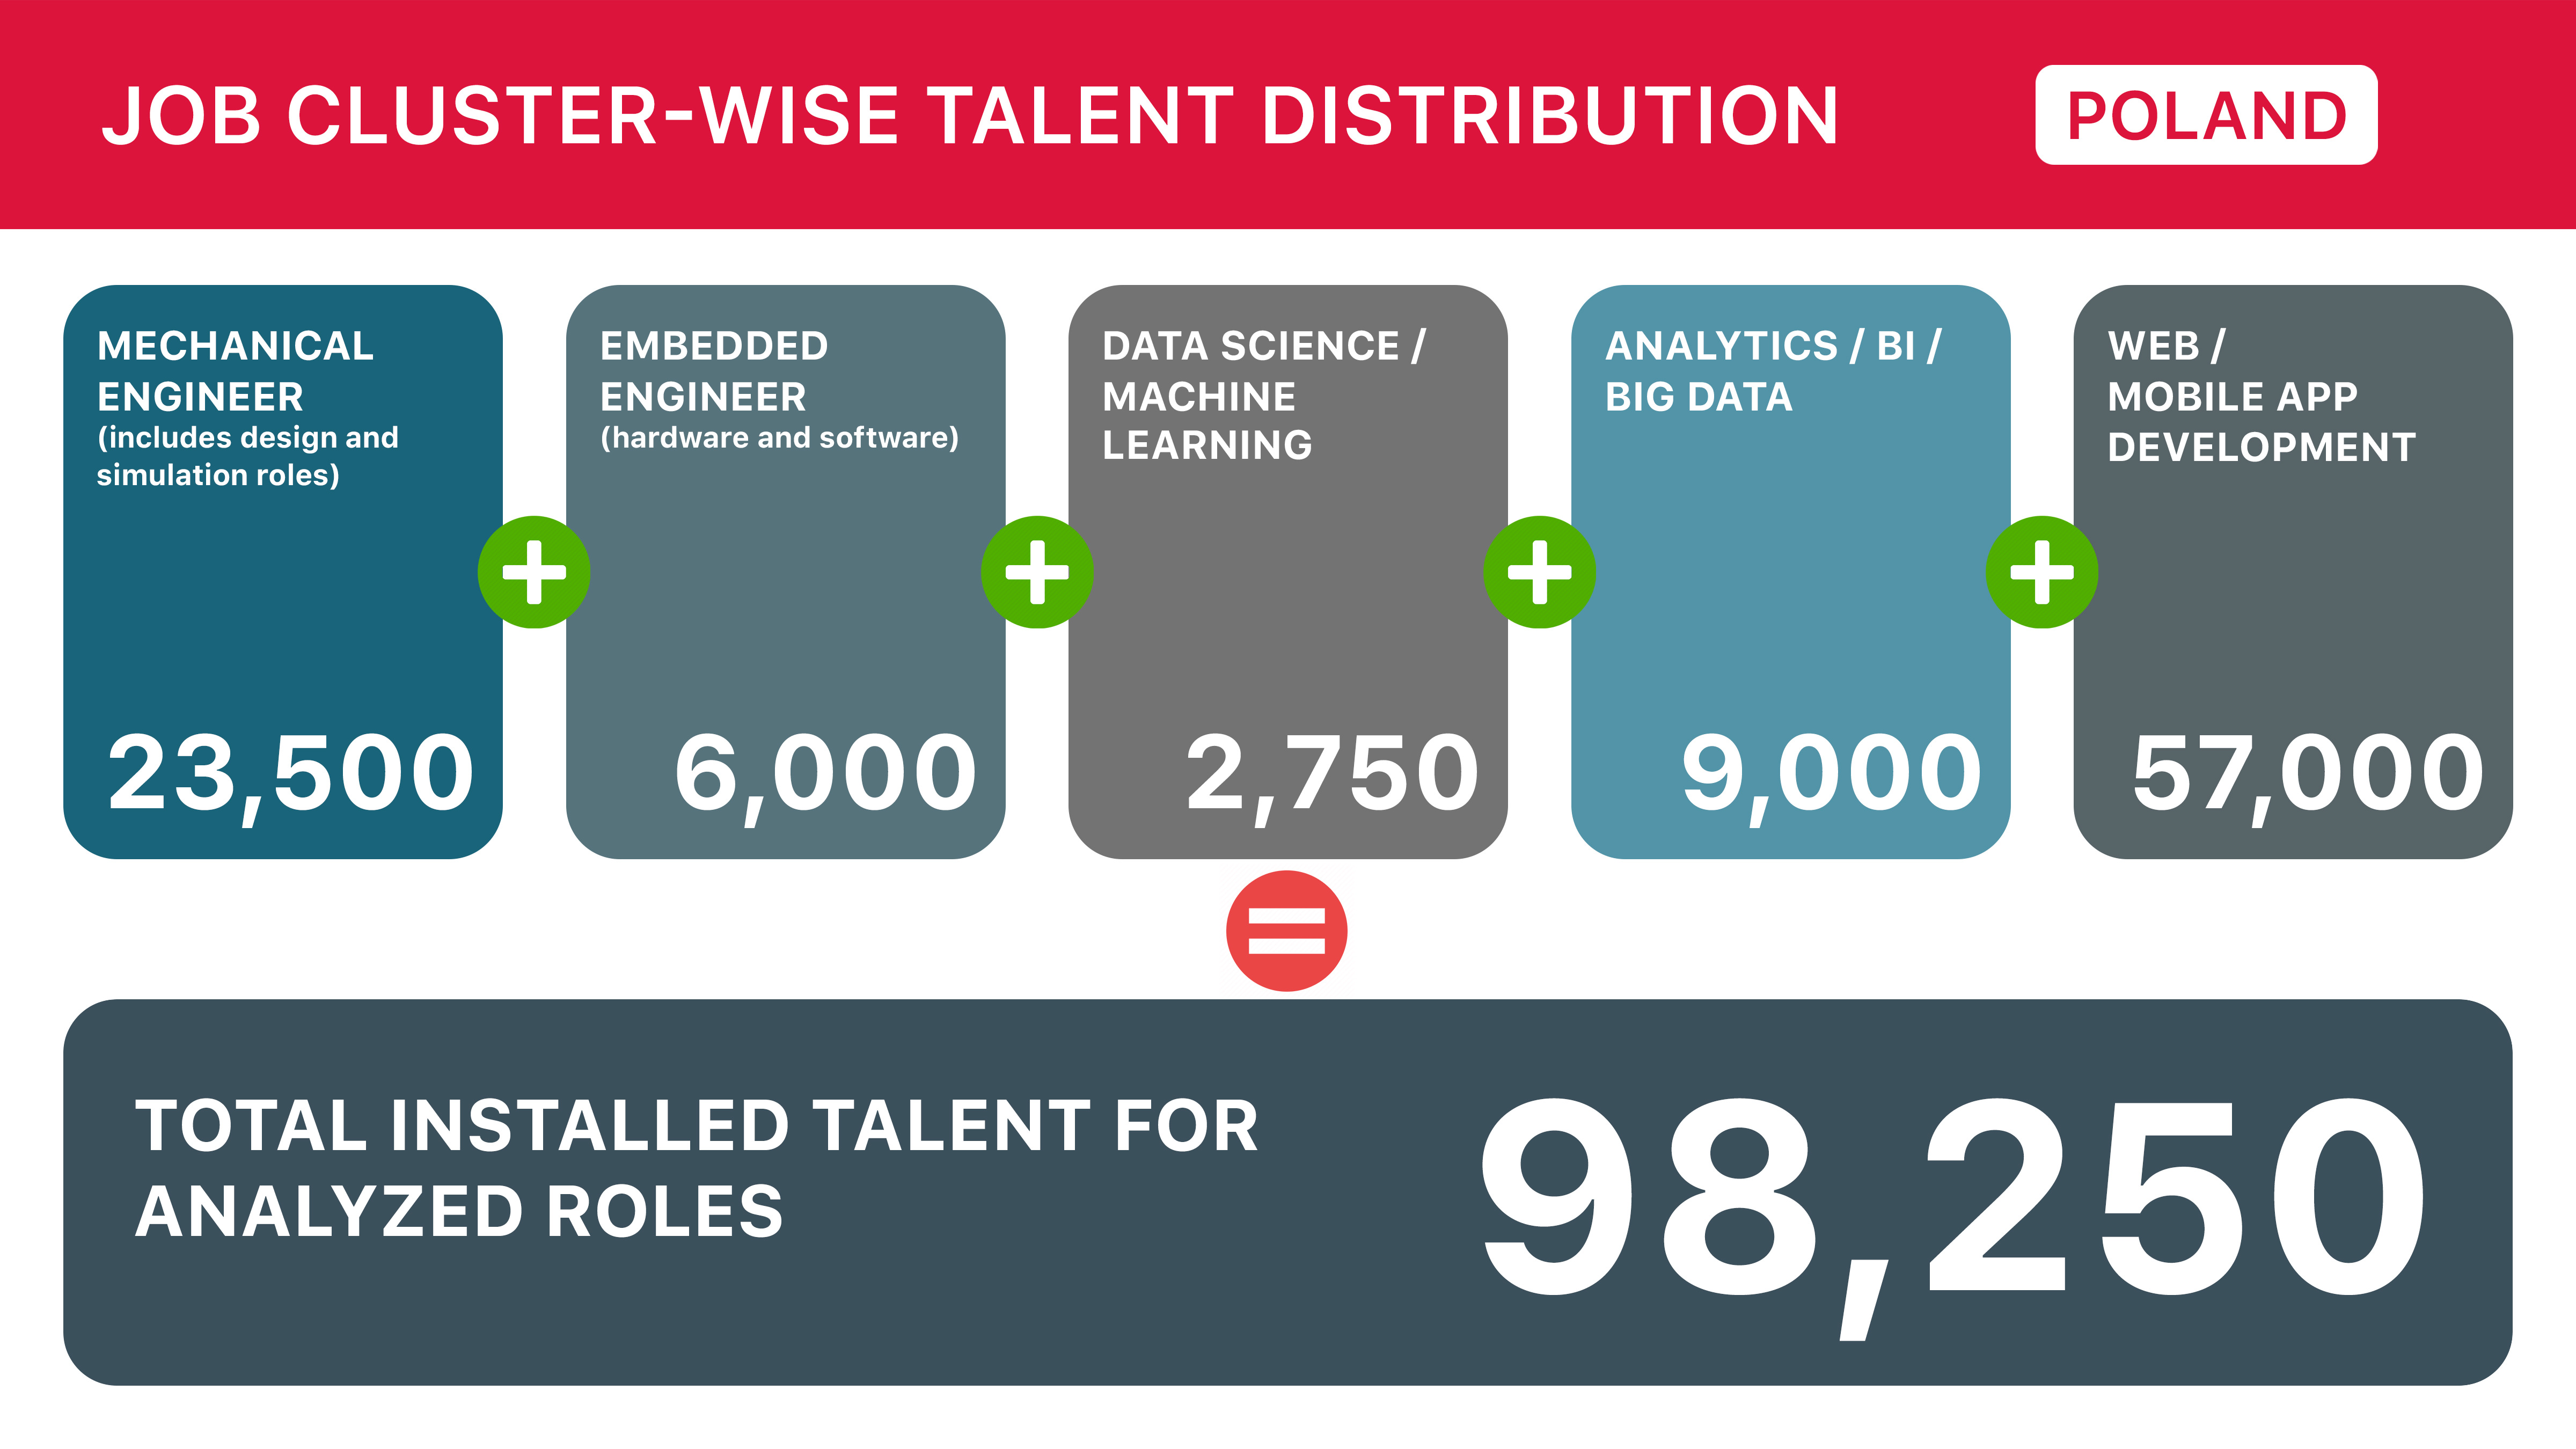 Poland Cluster-wise Talent Distribution